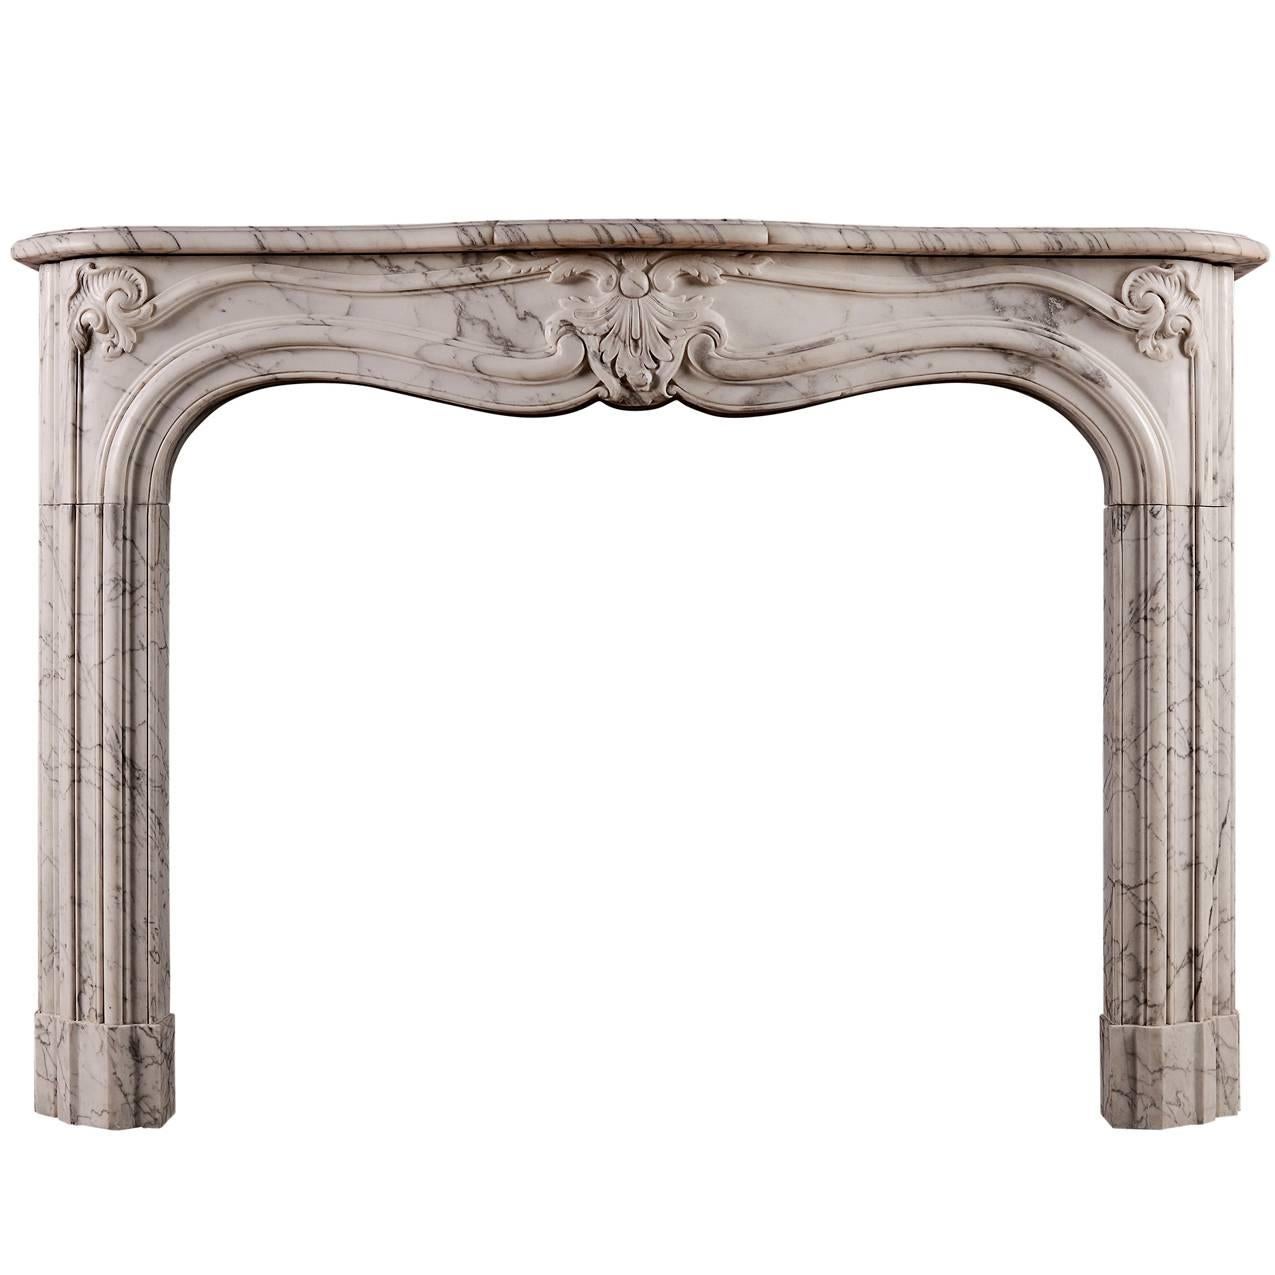 French Marble Fireplace Mantel in the Rococo Manner For Sale